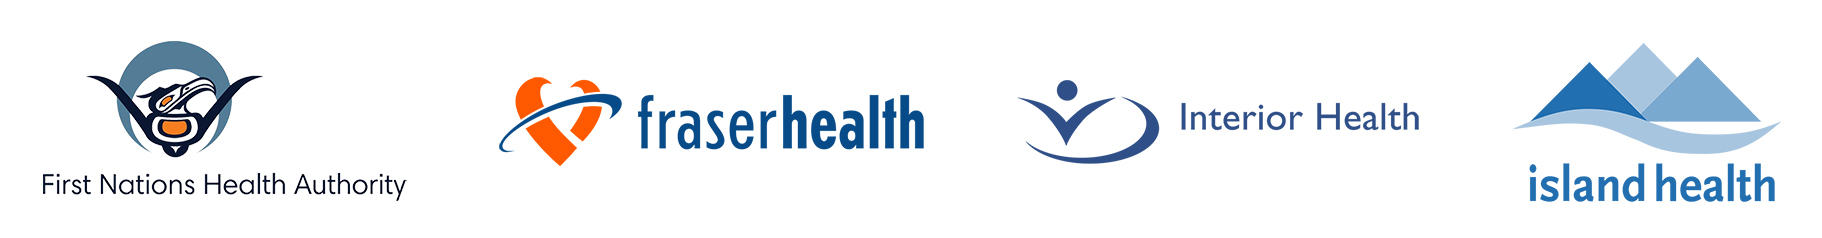 Logos of First Nations Health, Authority, Fraser Health, Interior Health and Island Health